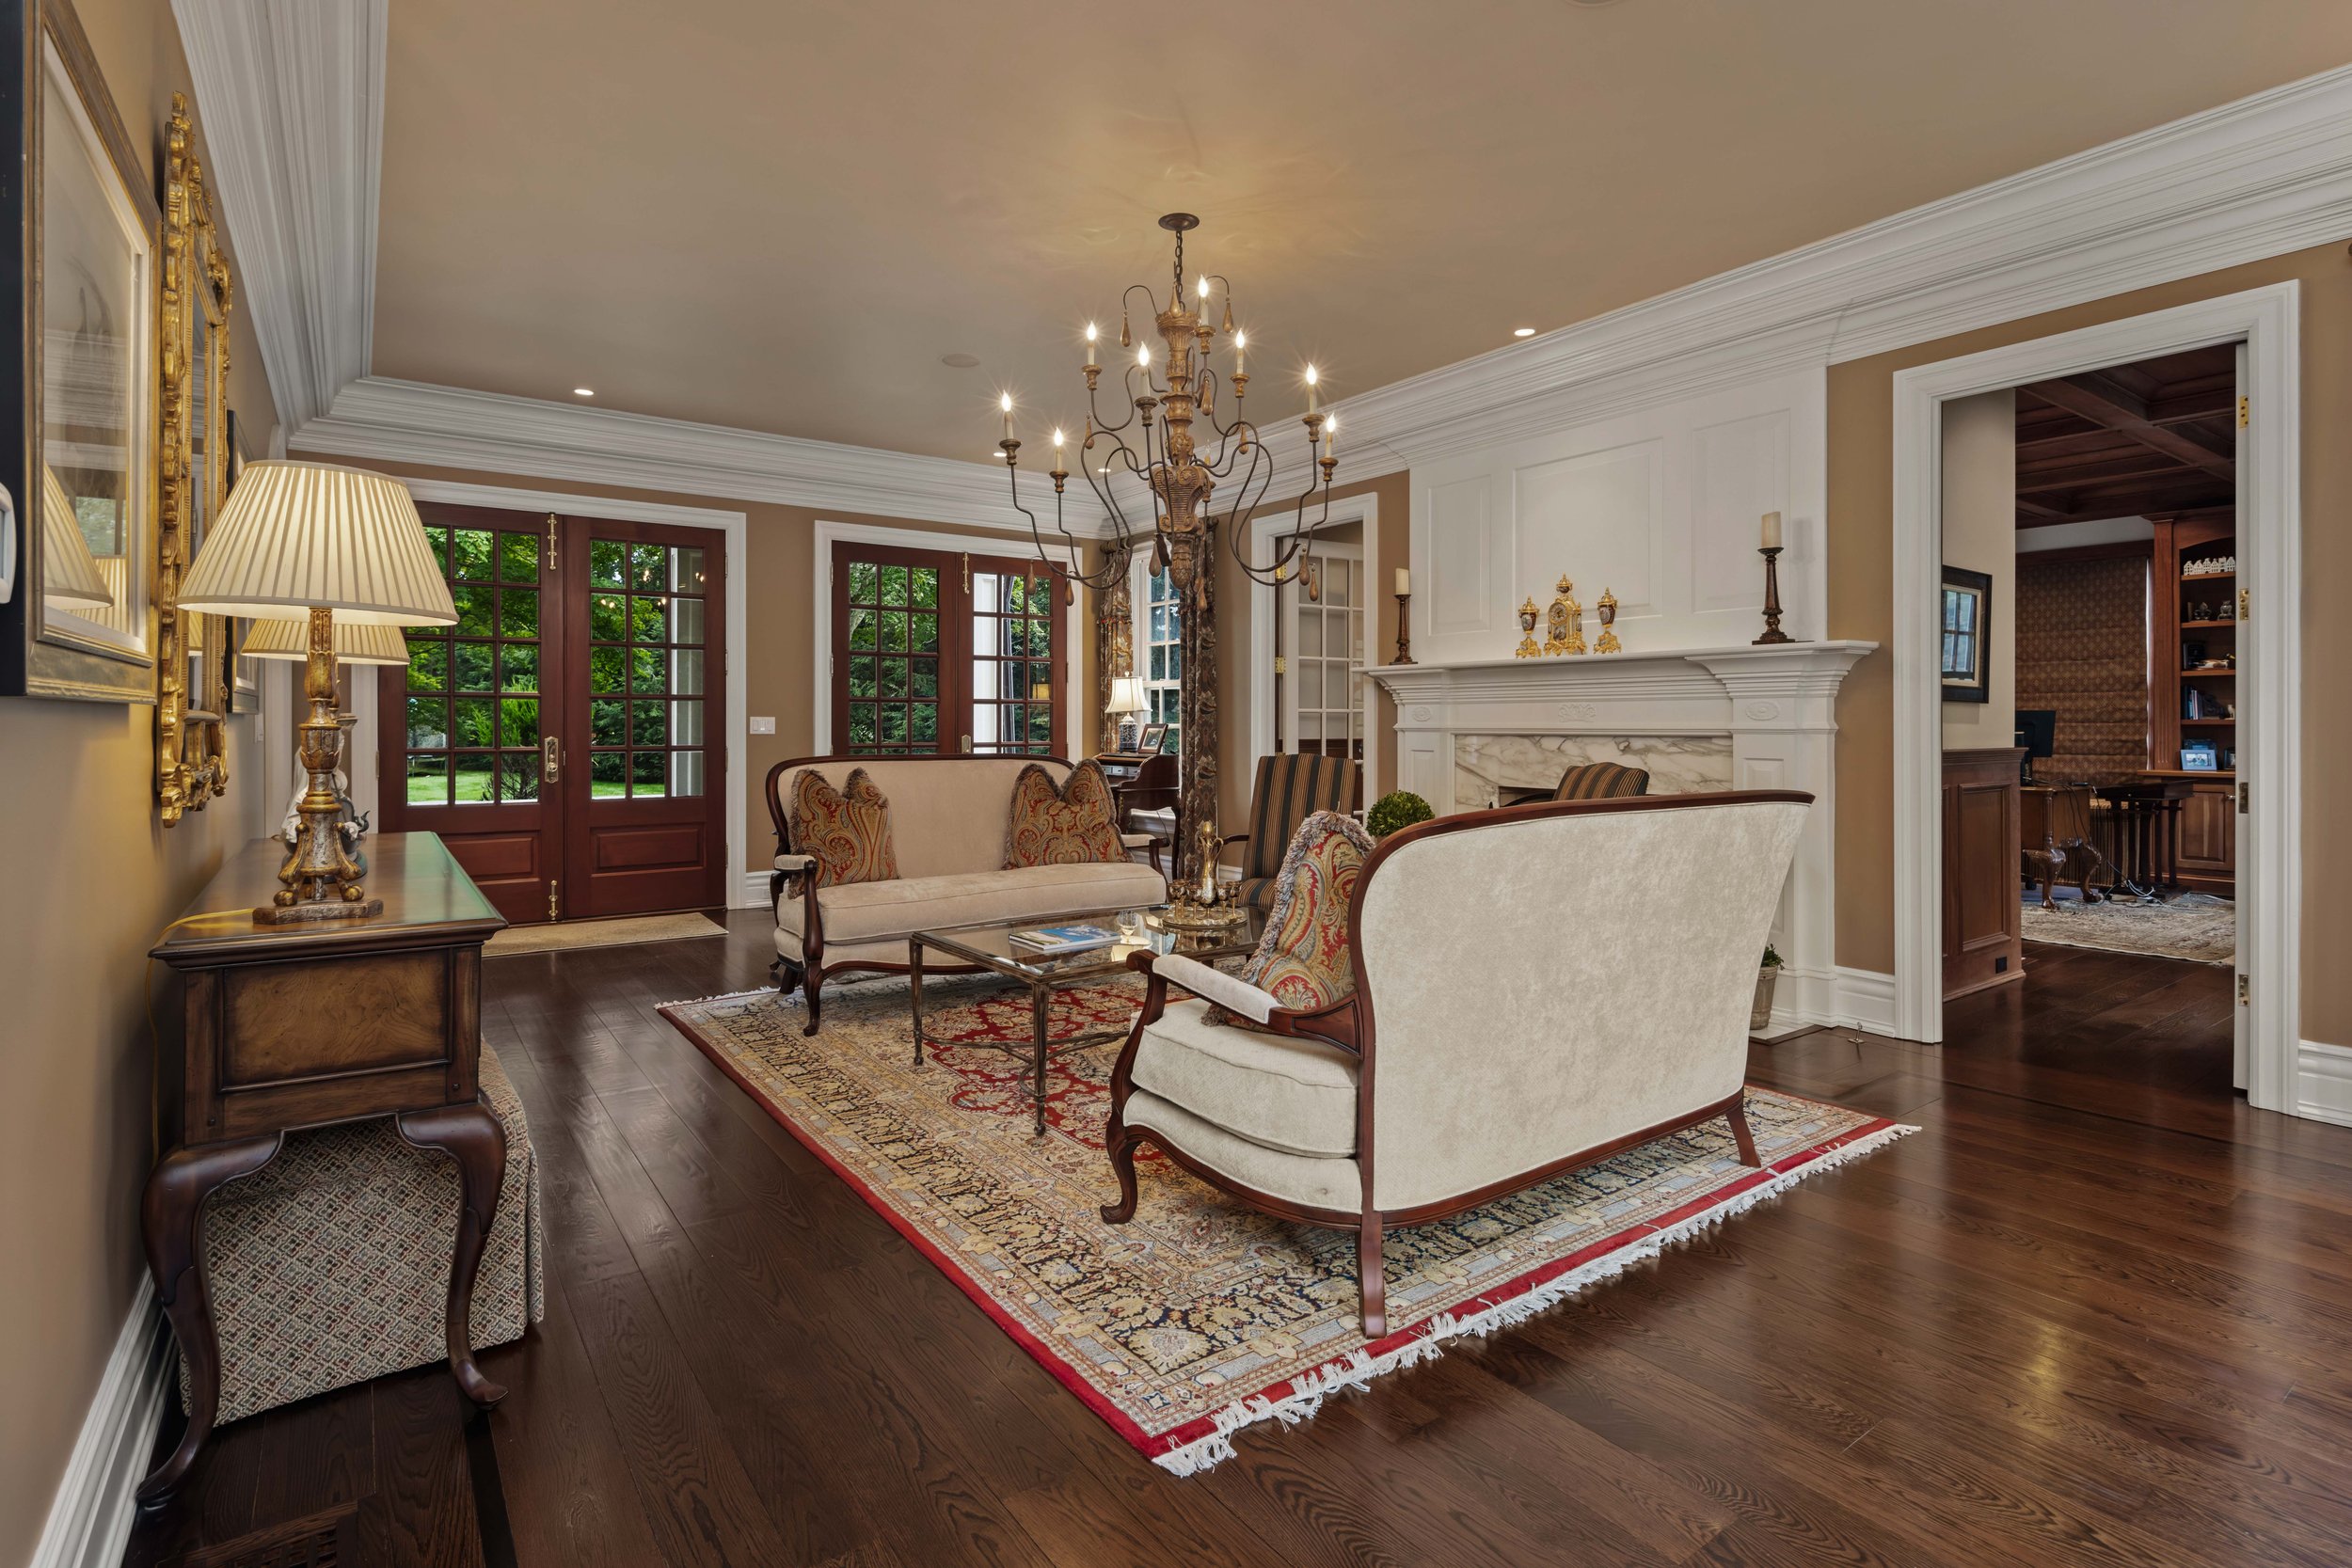 Living room with french doors at 5 Boxwood Ln, Westport, CT 06880-111.jpg